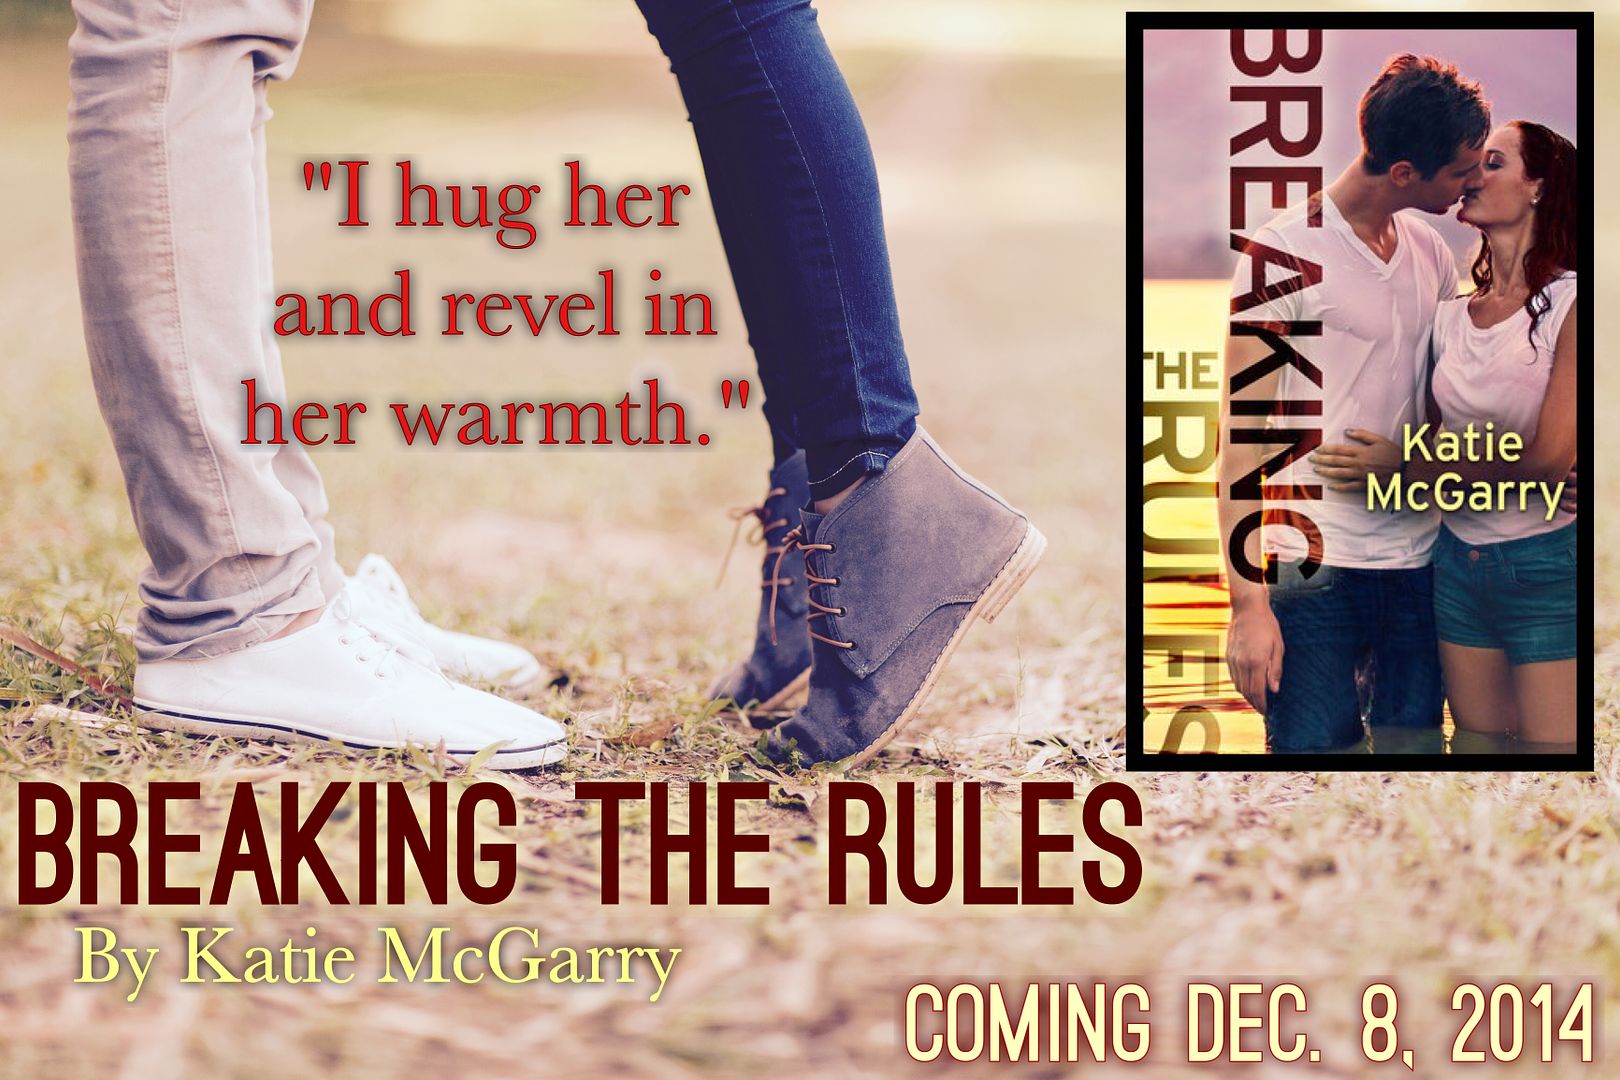 Breaking the Rules by Katie McGarry Teaser